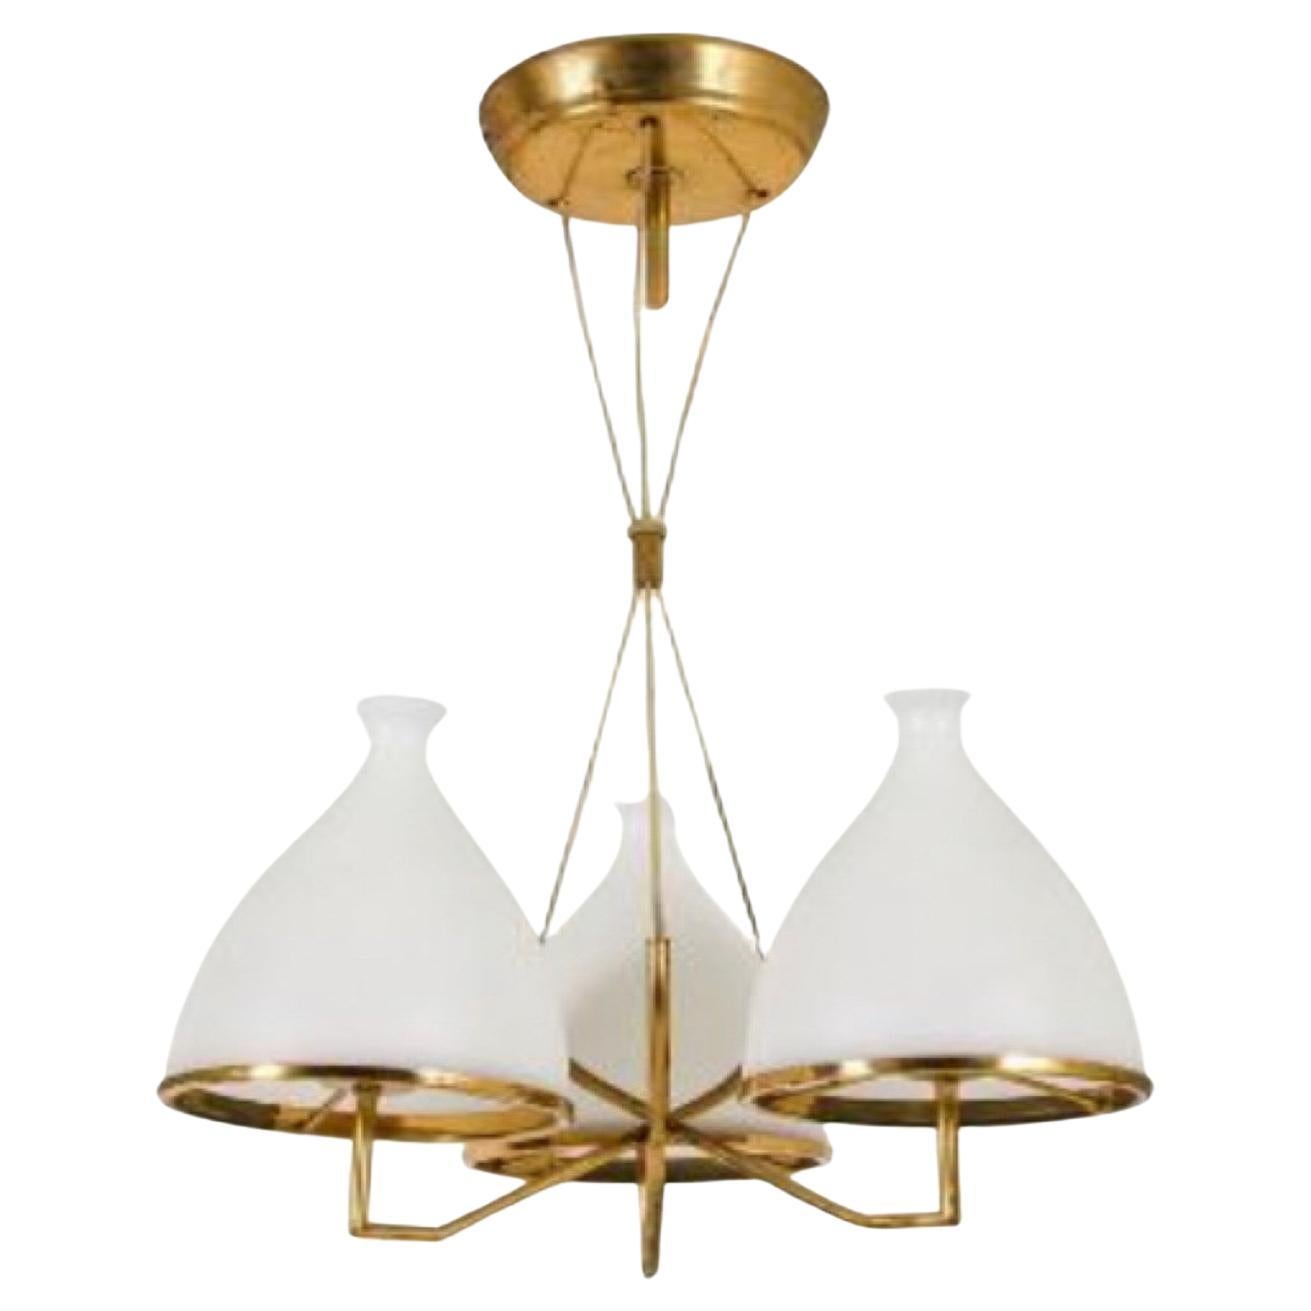 Two amazing chandeliers made in Italy attributed to Stilnovo, circa 1958, the structure in polished brass it's in original patina and the white satin glass diffusers are in excellent conditions. They works 110-240 volts, each chandelier needs three